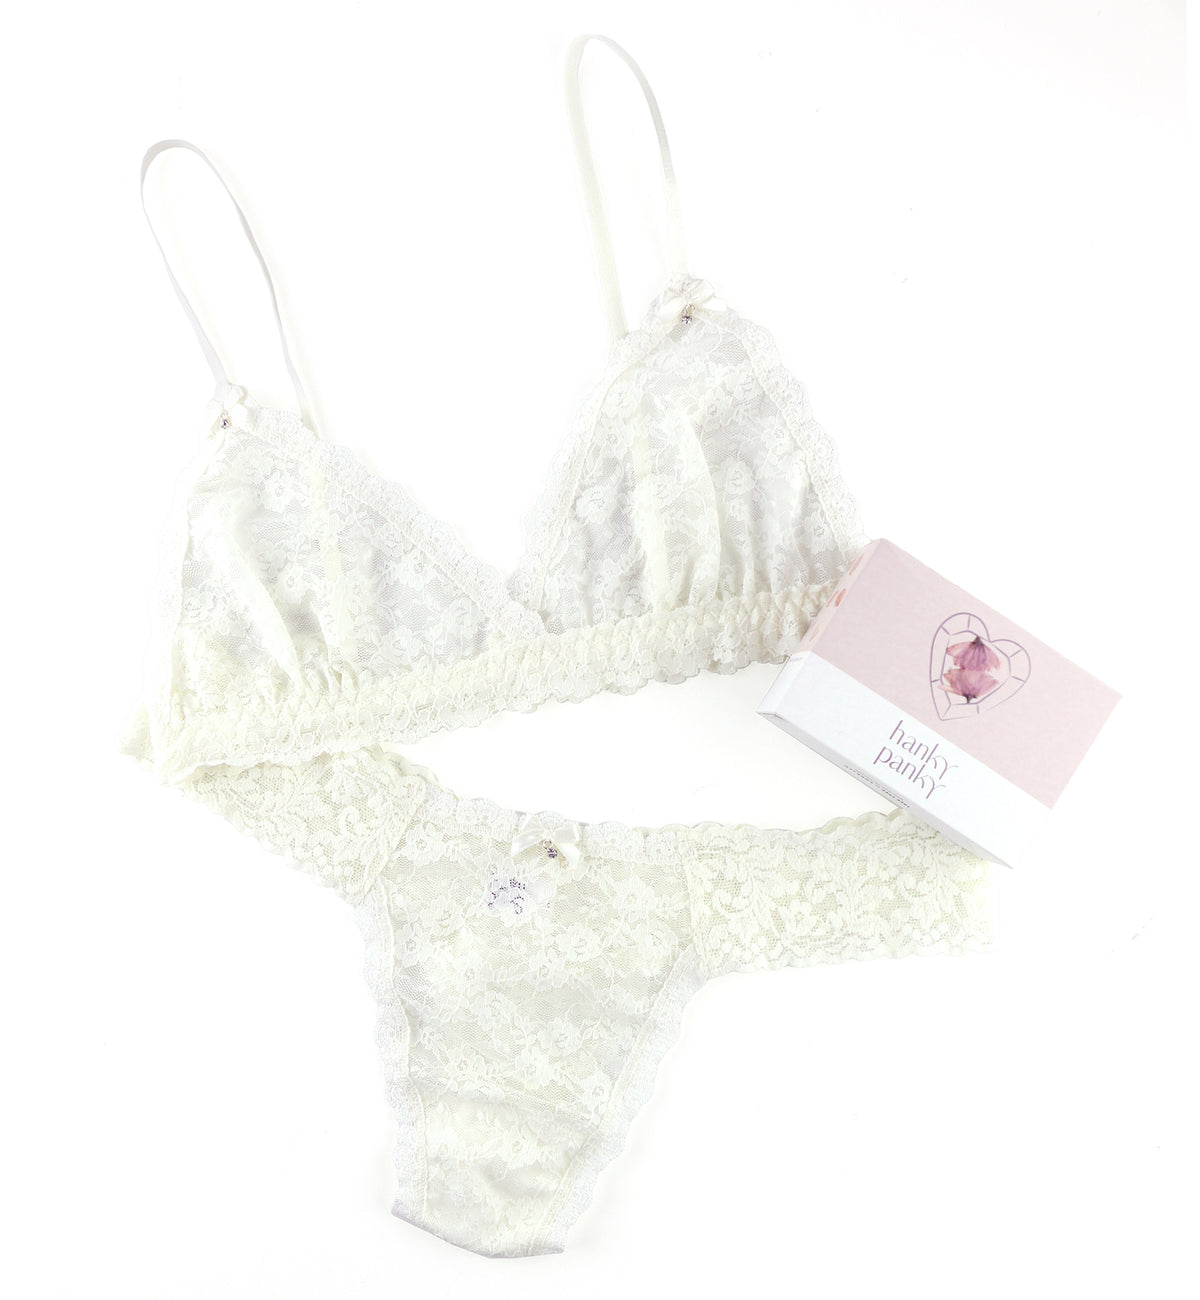 Hanky Panky Wedding Night Low Rise Thong and Bralette Set (9C103SBX22),Small,Light Ivory - Light Ivory,Small